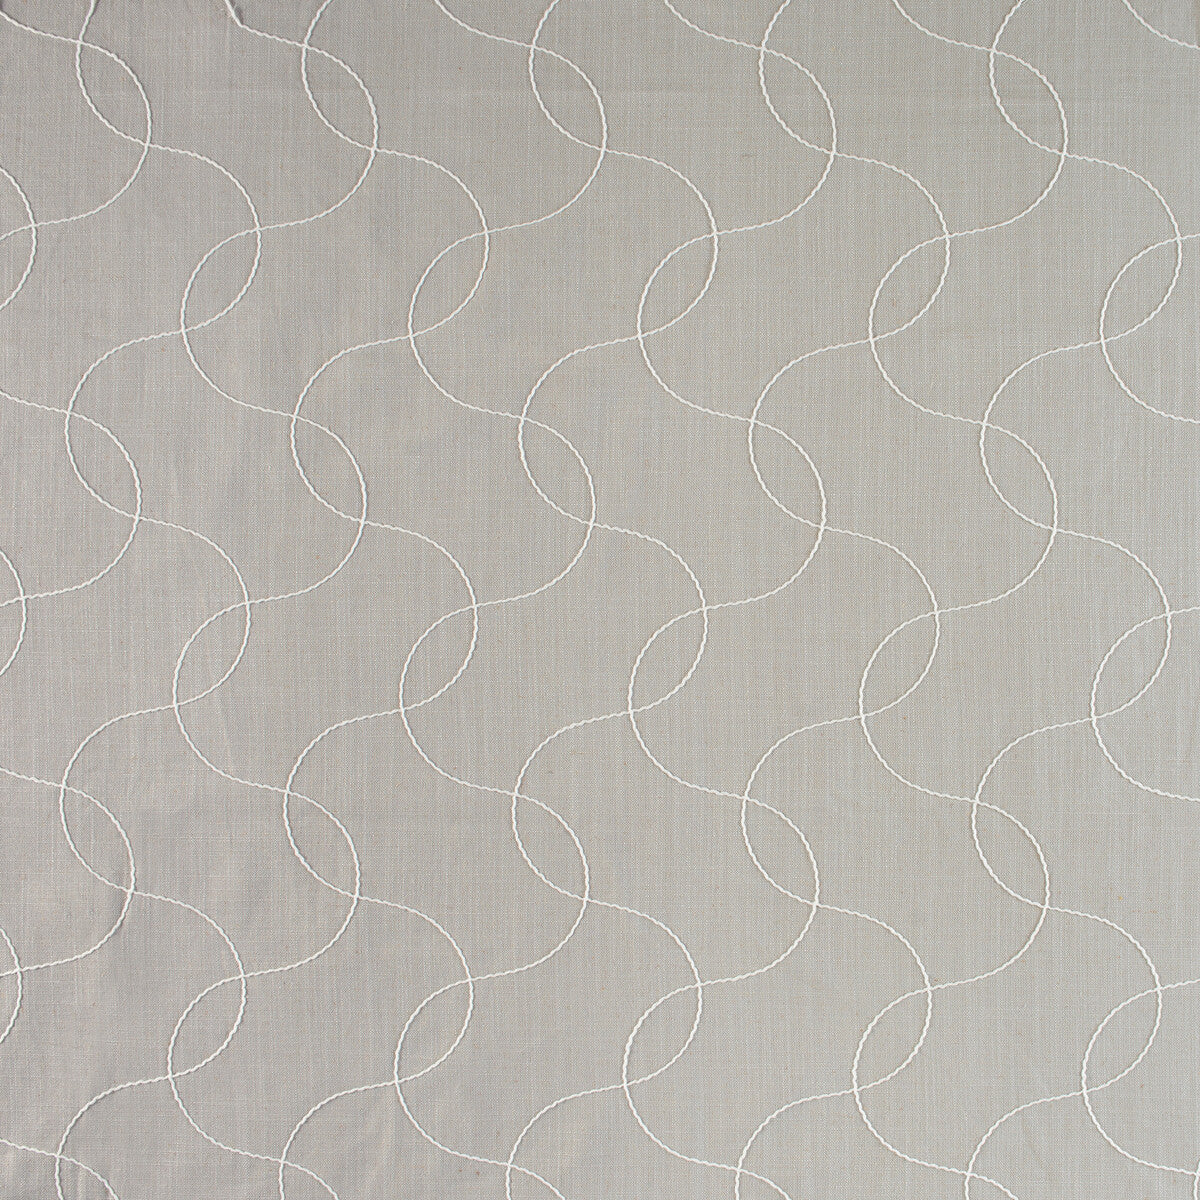 Awander fabric in pearl grey color - pattern 35898.11.0 - by Kravet Design in the Barbara Barry Home Midsummer collection